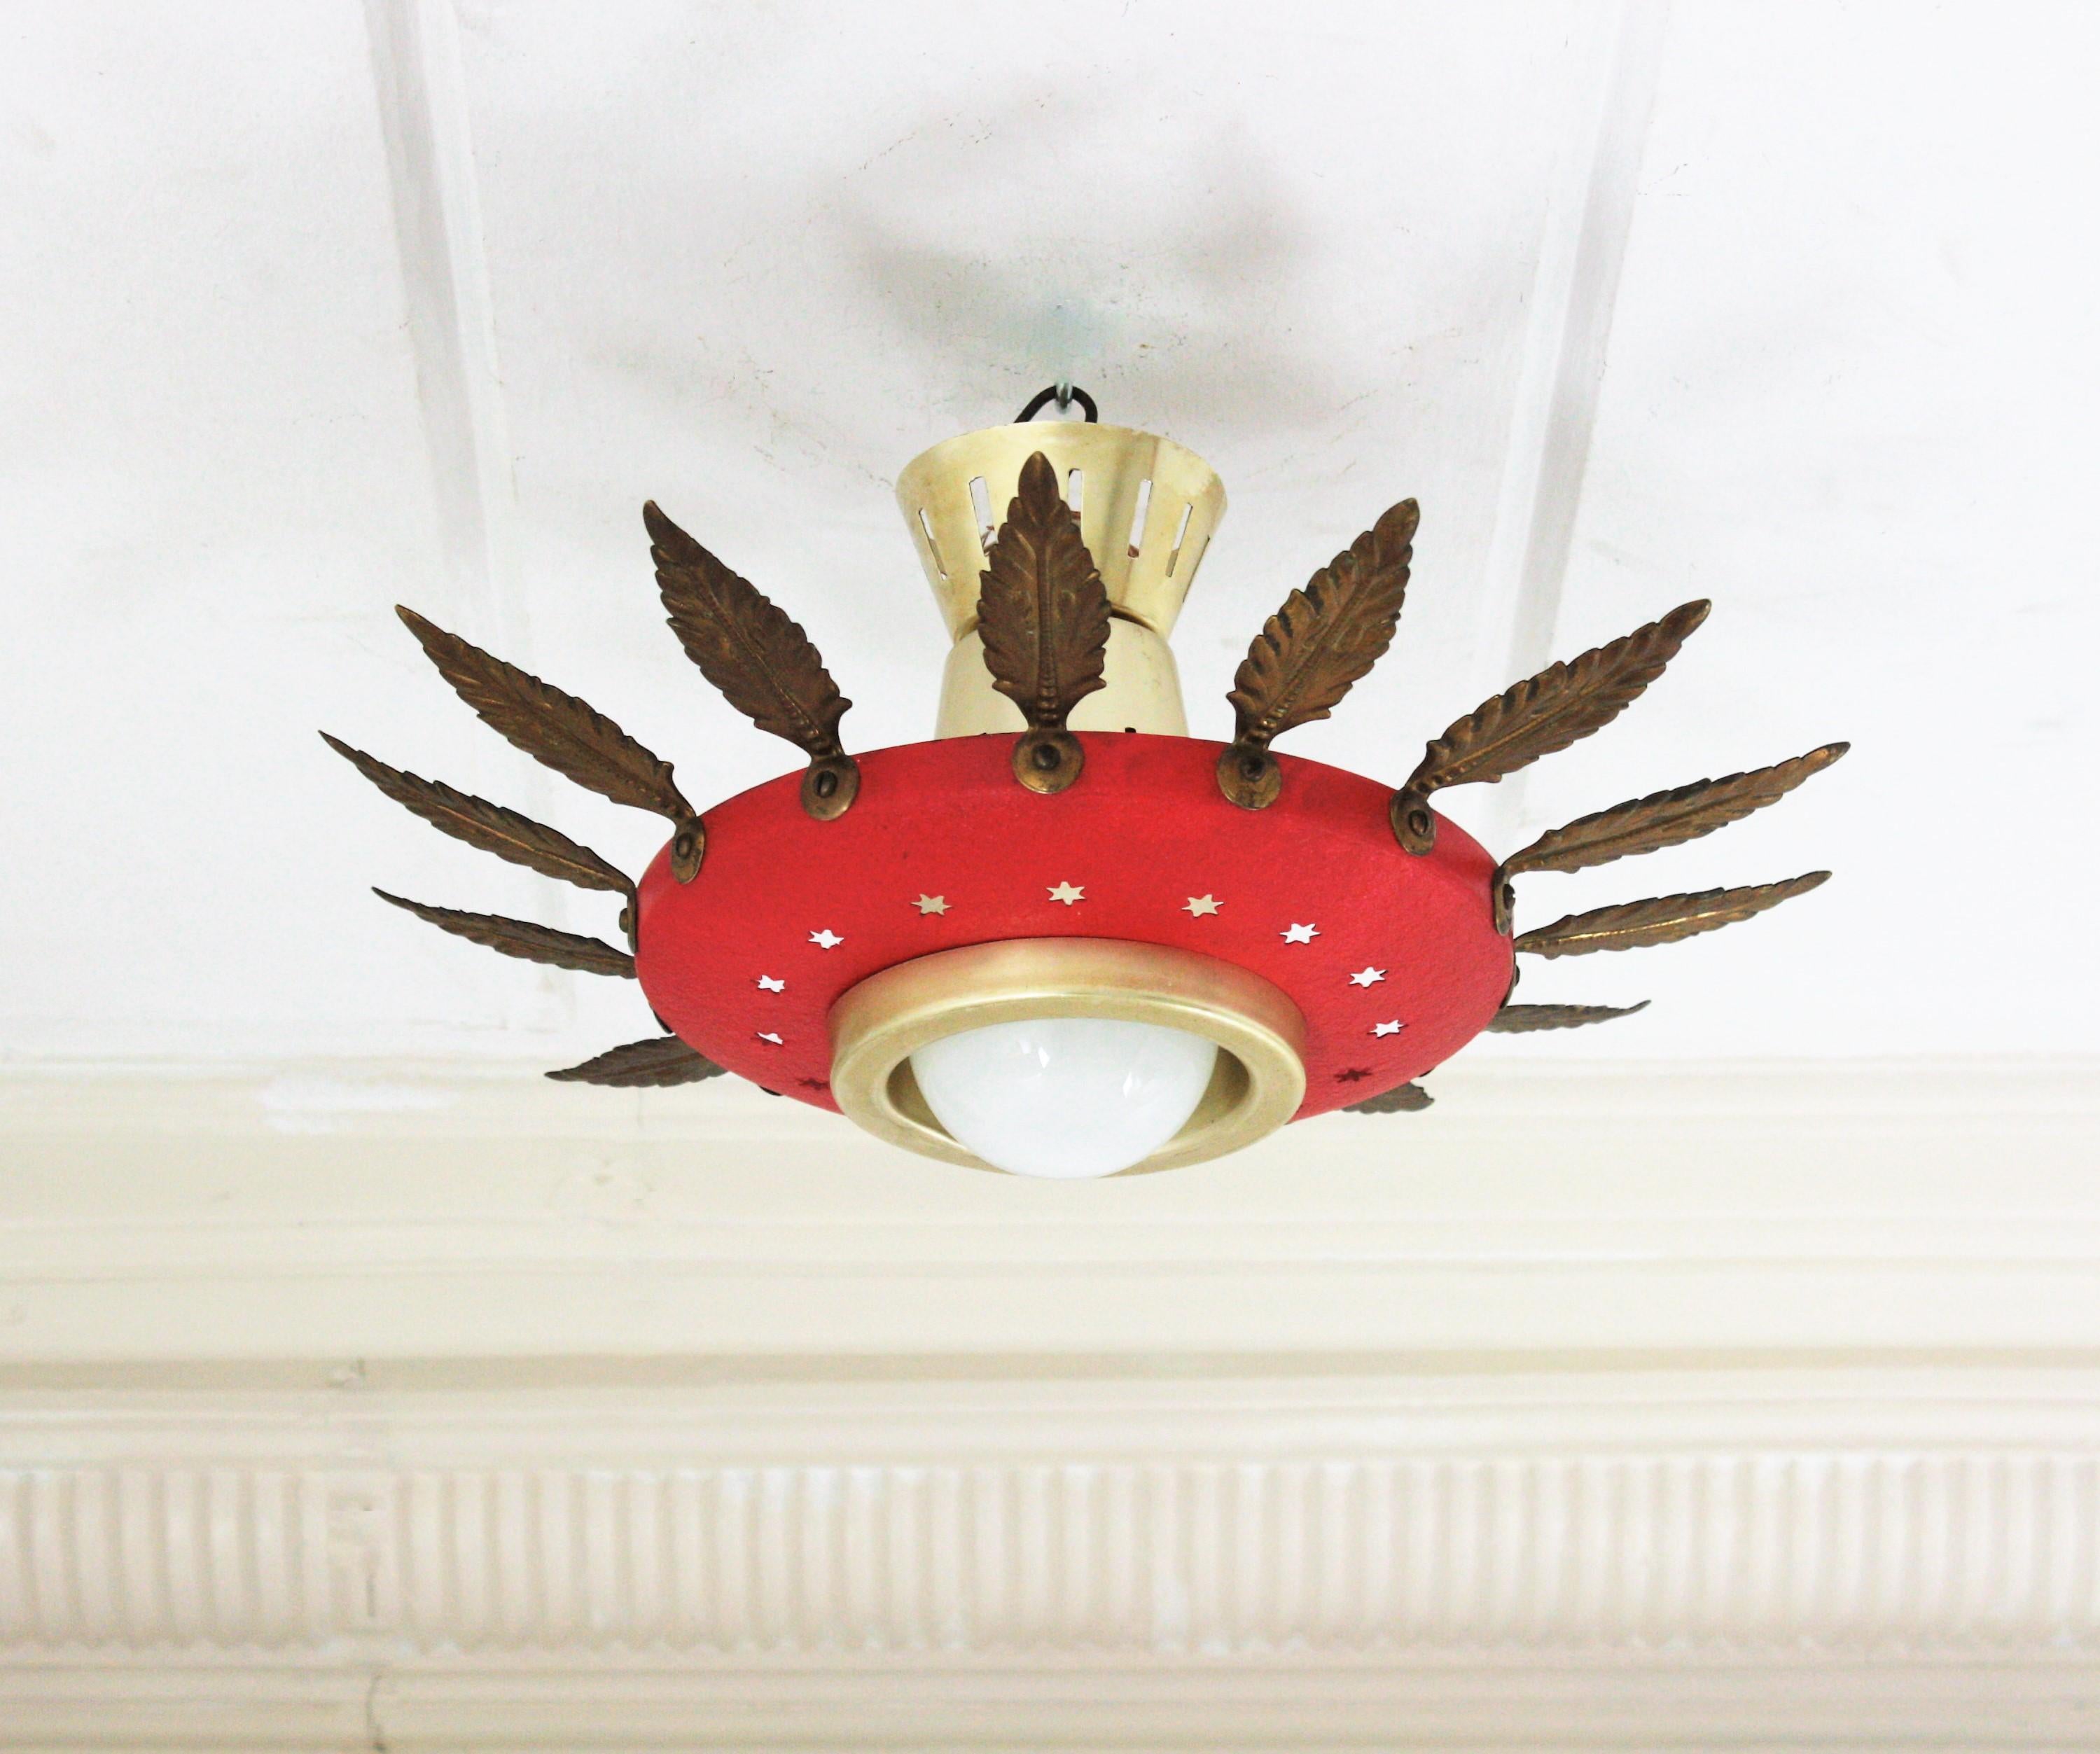 Italian 1950s Sunburst Flush Mount Pendant Light, Red Metal and Brass In Good Condition For Sale In Barcelona, ES